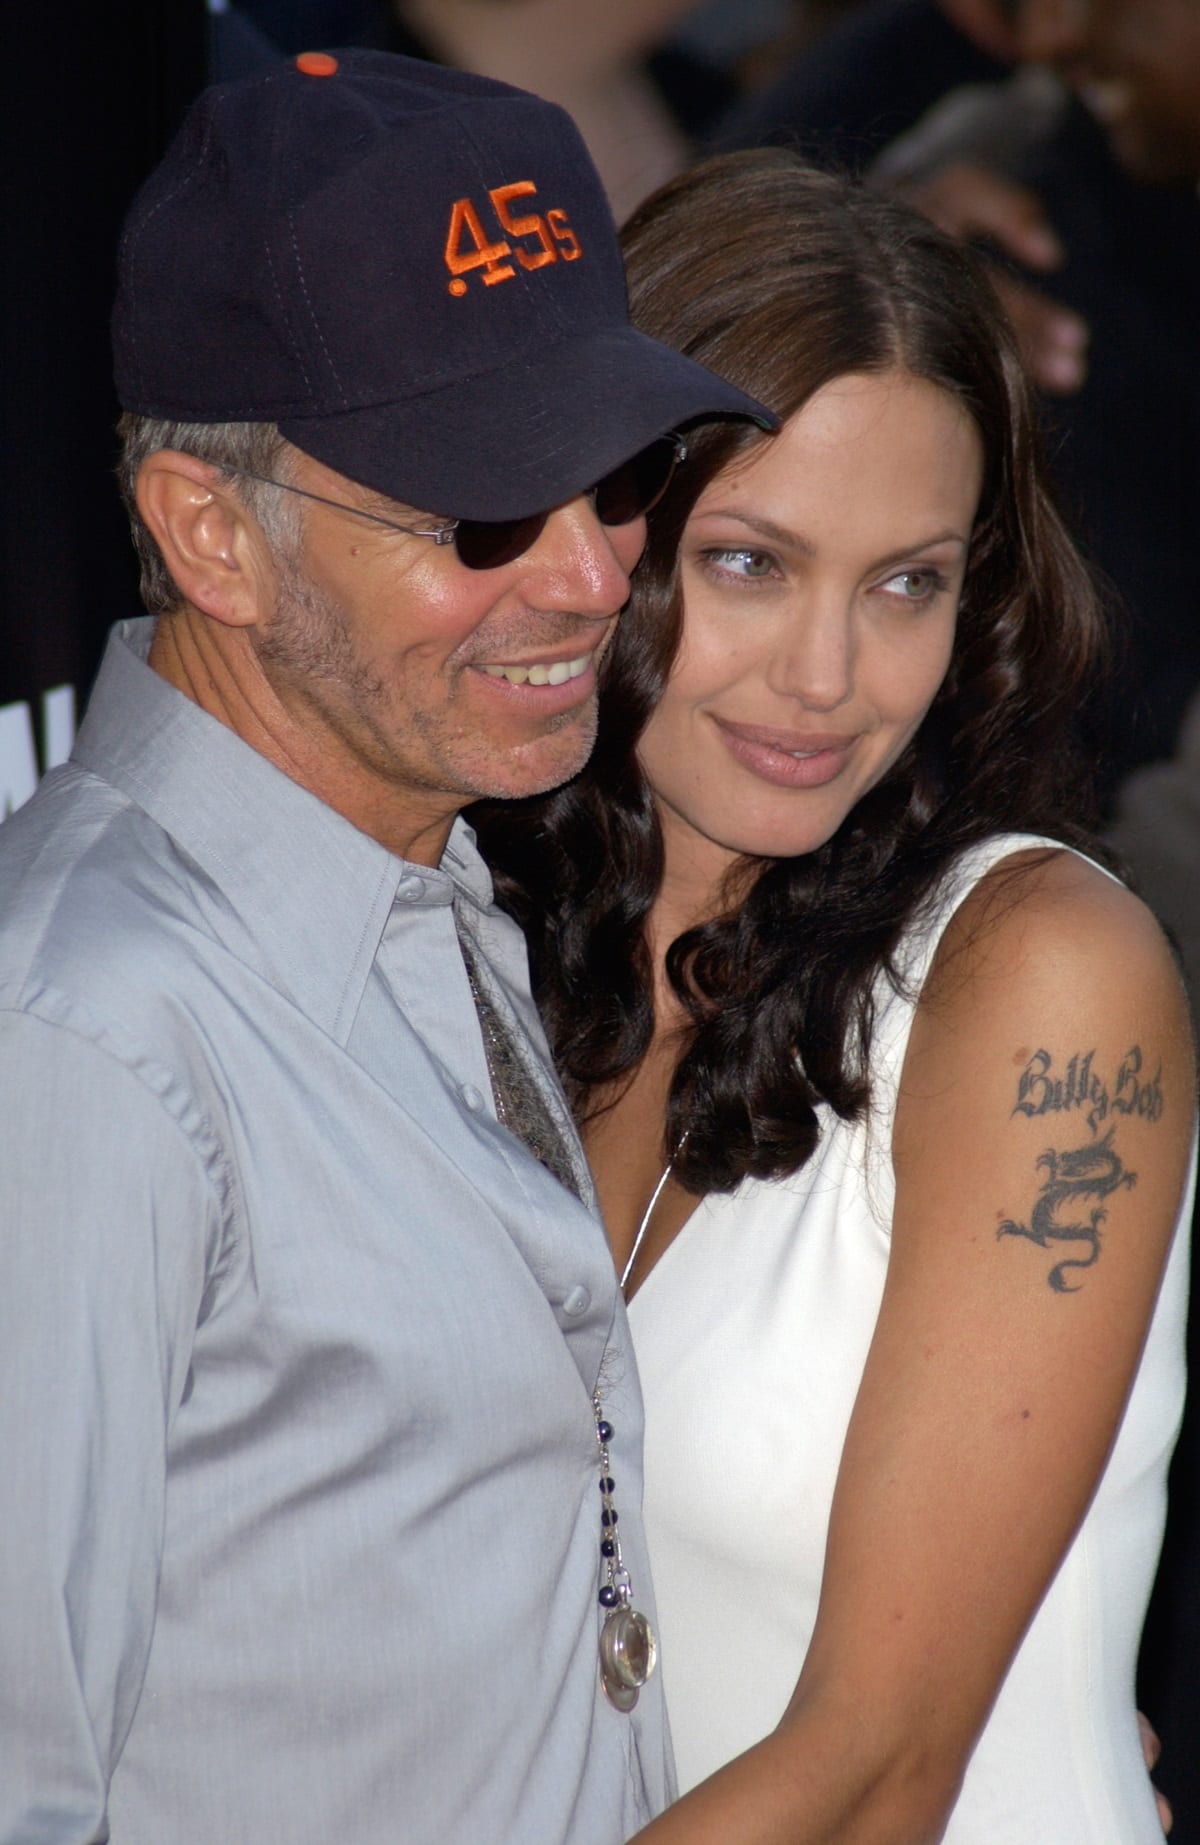 Angelina Jolie, born on June 4, 1975, and Billy Bob Thornton, born on August 4, 1955, had a 19-year age gap, with Jolie being 24 and Thornton 43 when they married